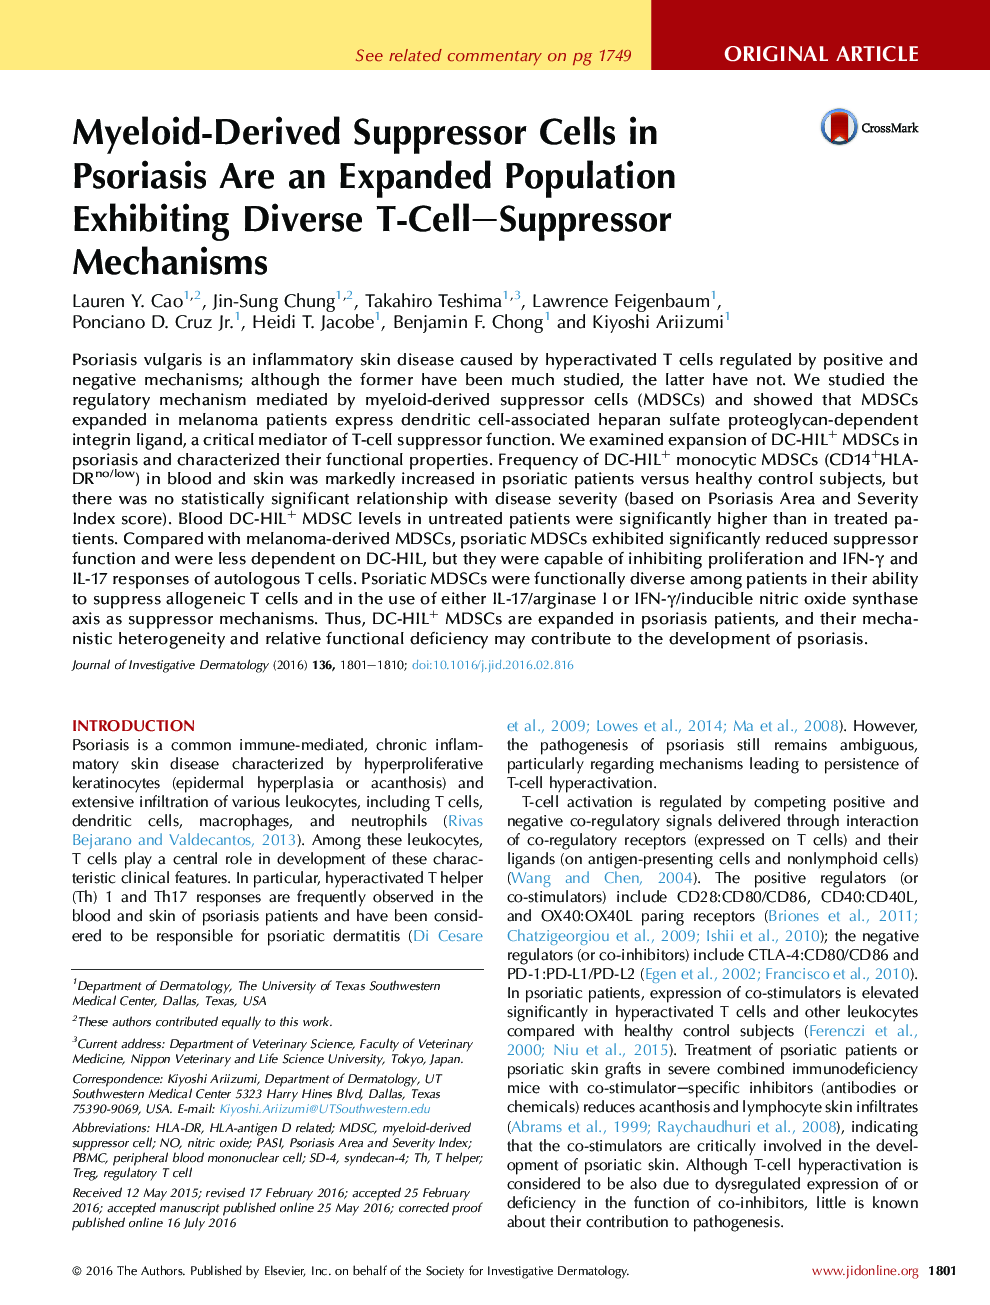 Myeloid-Derived Suppressor Cells in Psoriasis Are an Expanded Population Exhibiting Diverse T-Cell–Suppressor Mechanisms 